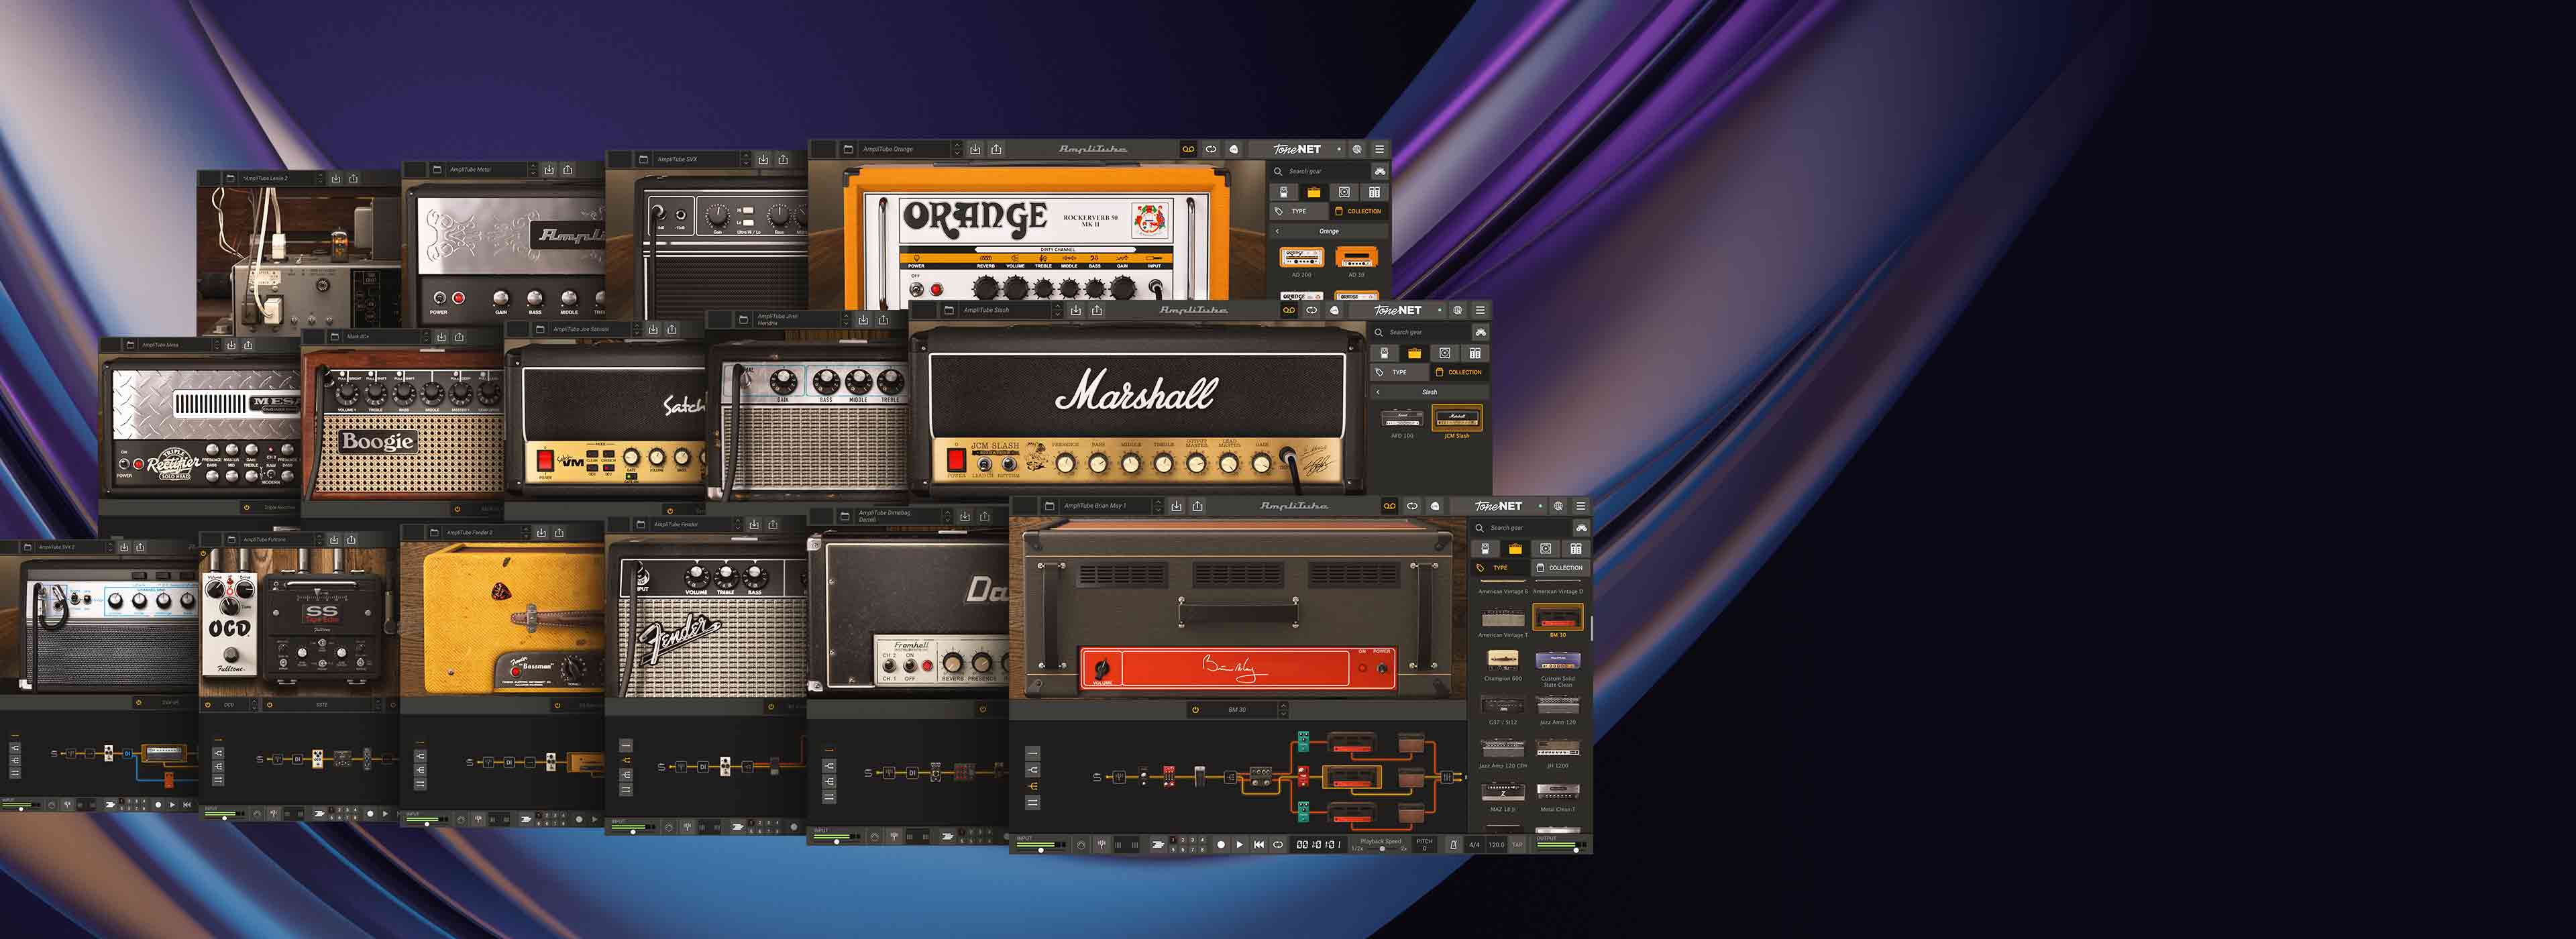 Save up to 60% on premium guitar tone